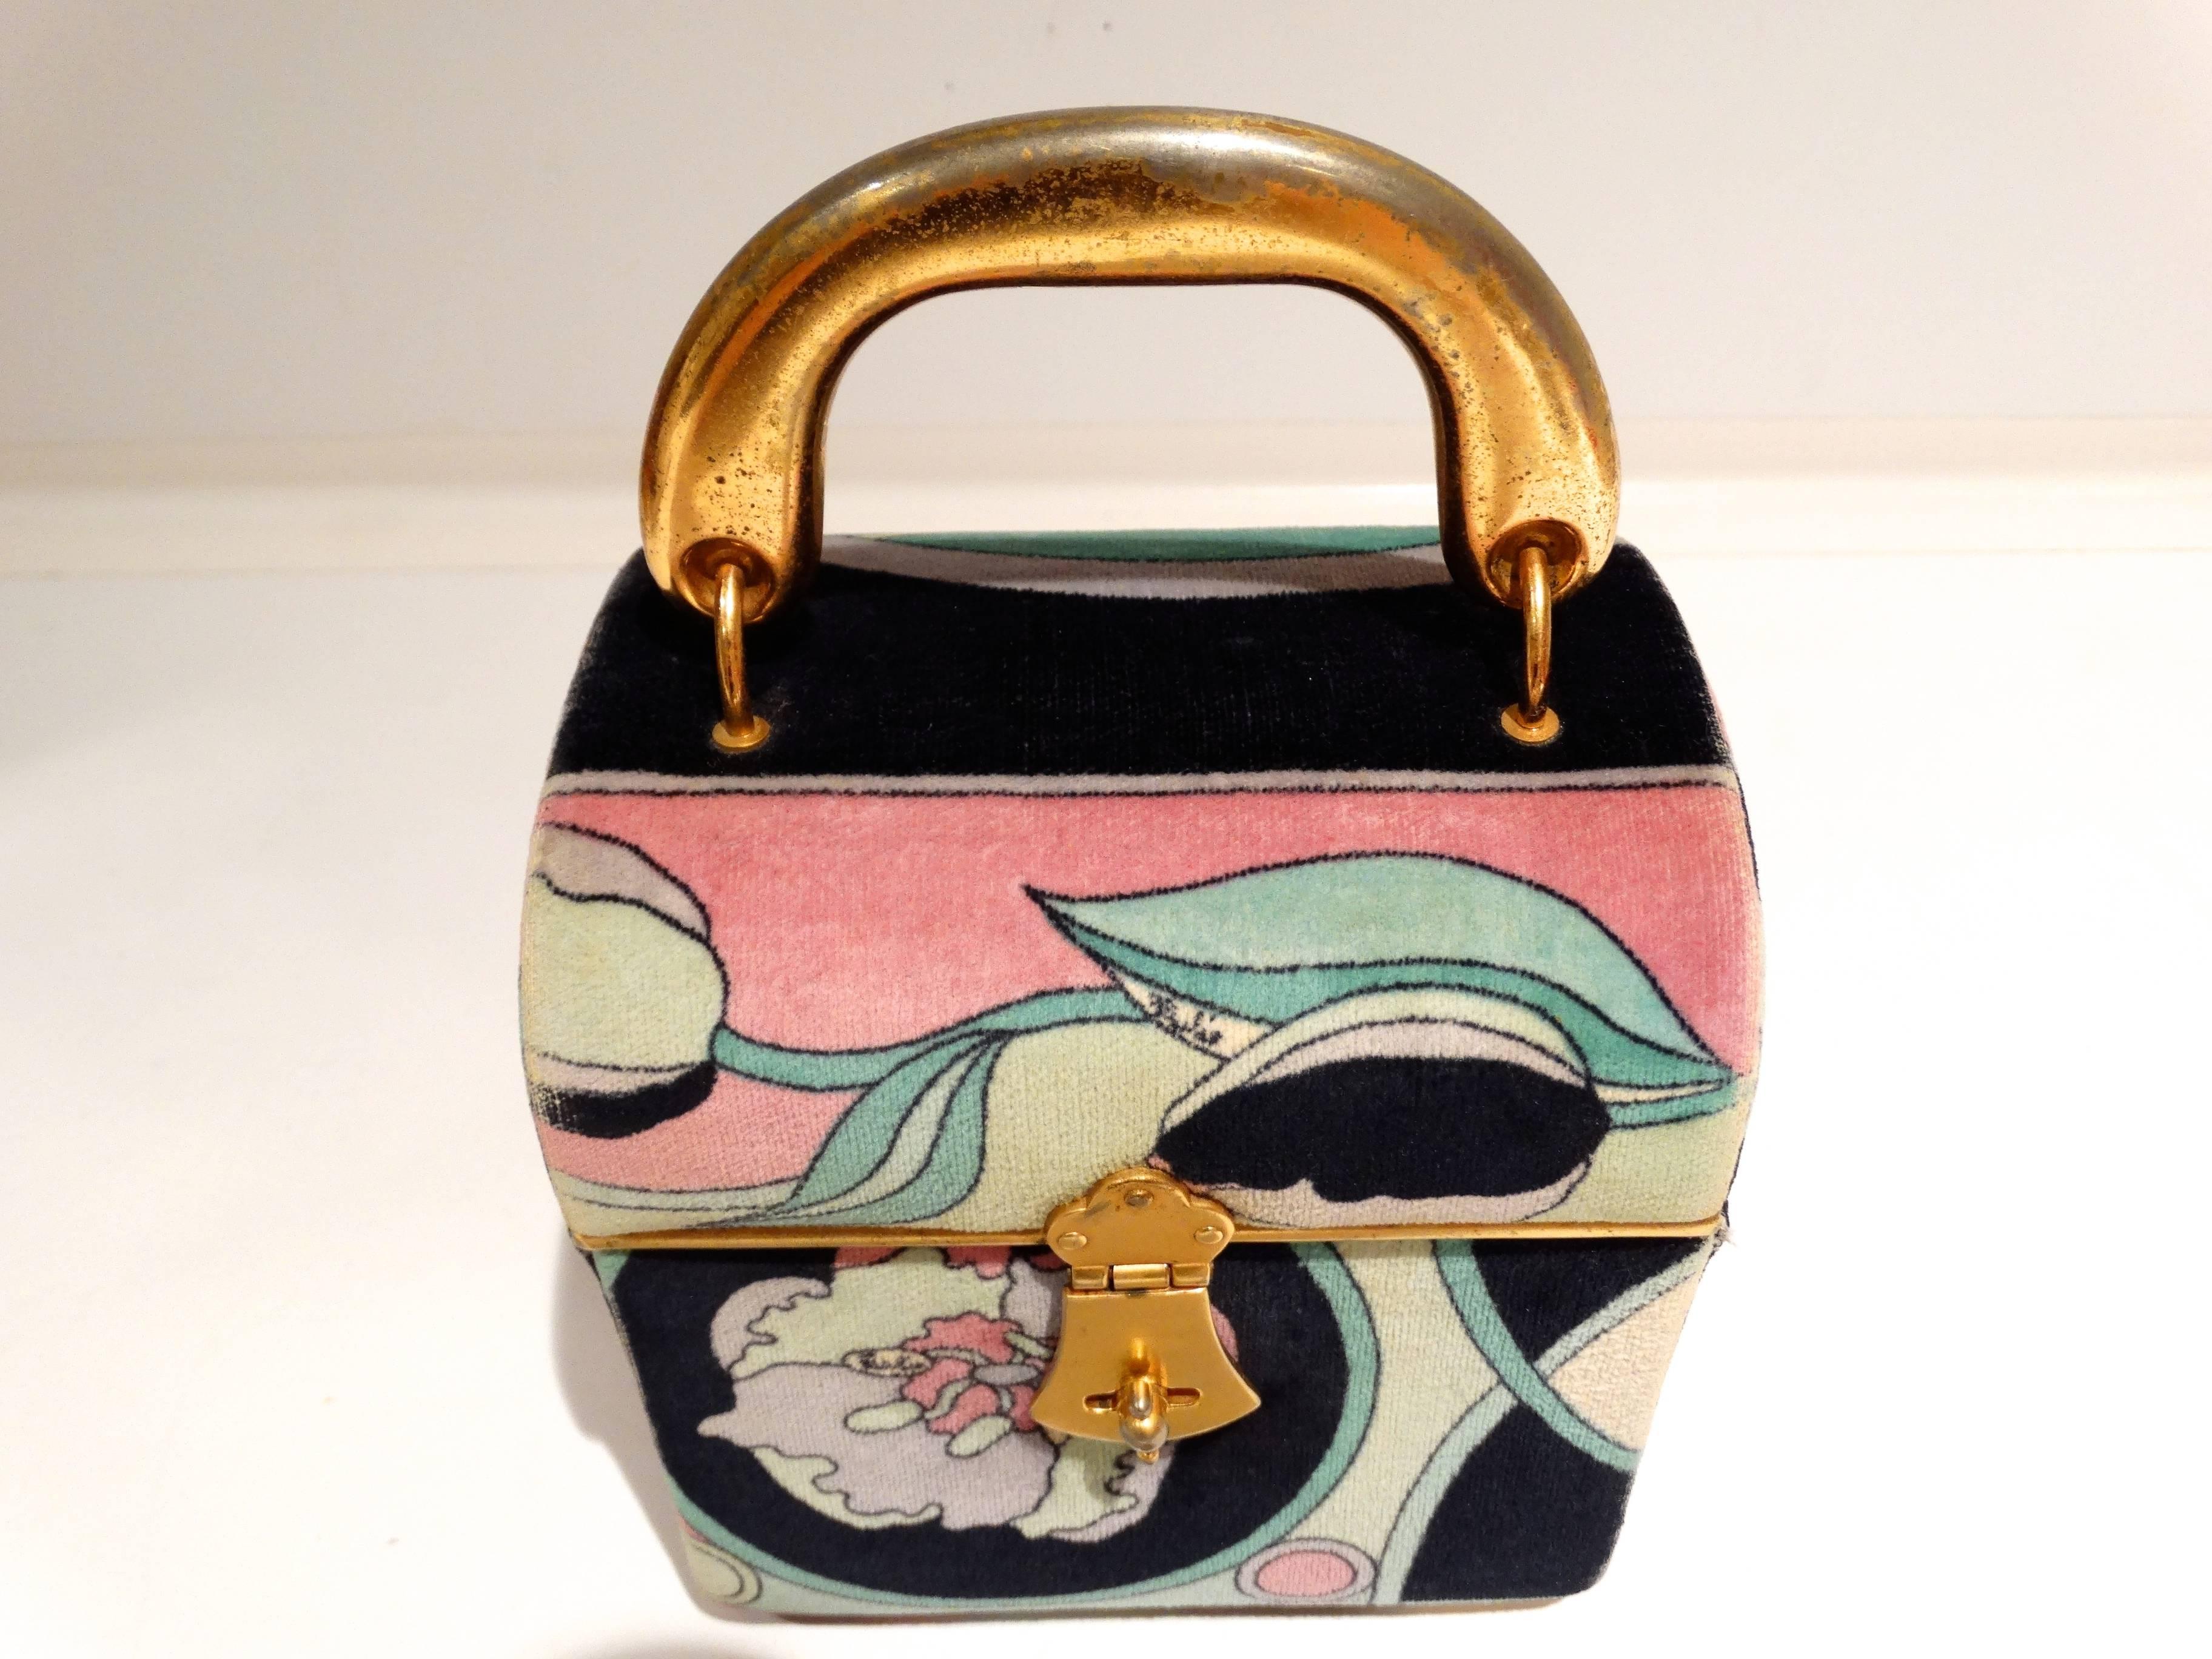 Pucci Velveteen Small Box Bag, 1969. Casket shape, with rigid flat gilt-metal handle, suitcase lock, printed with a floral pattern in shades of turquoise, black, putty and lilac. Inside is lined in light purple leather, labeled: Emilio